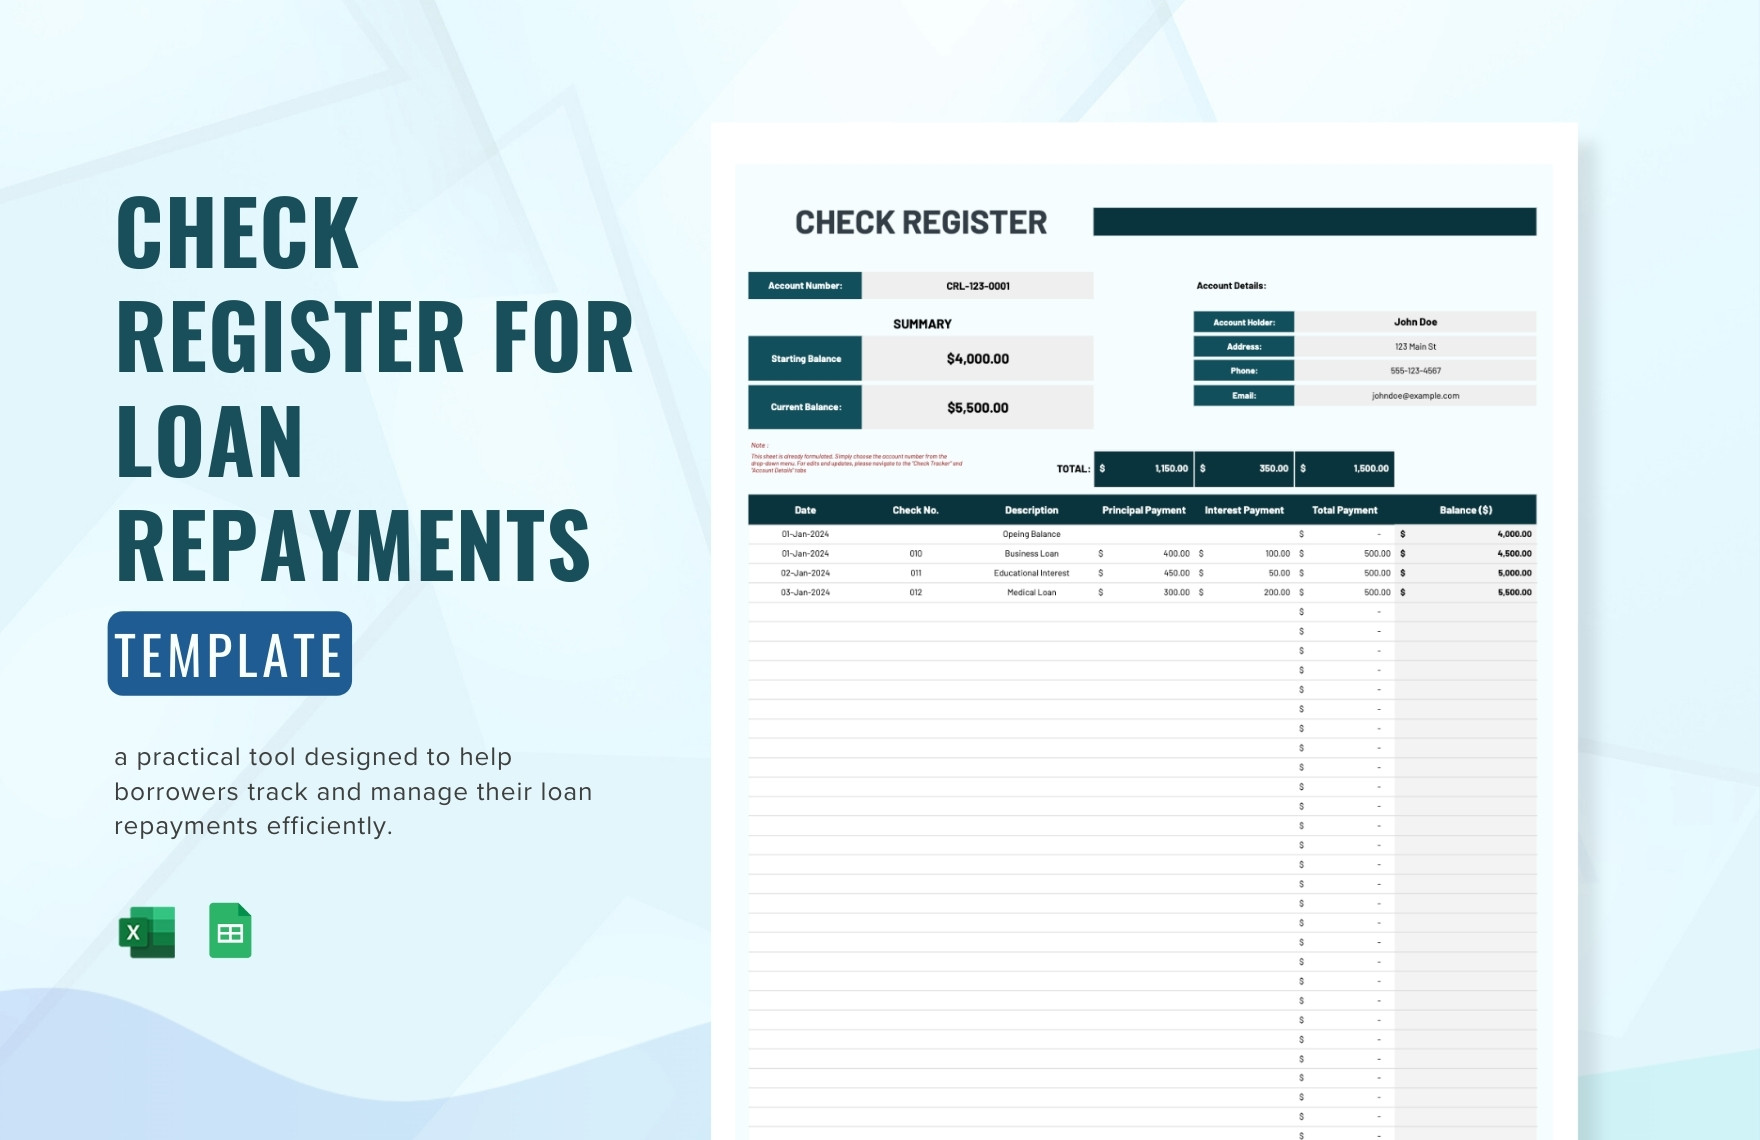 Check Register for Loan Repayments Template